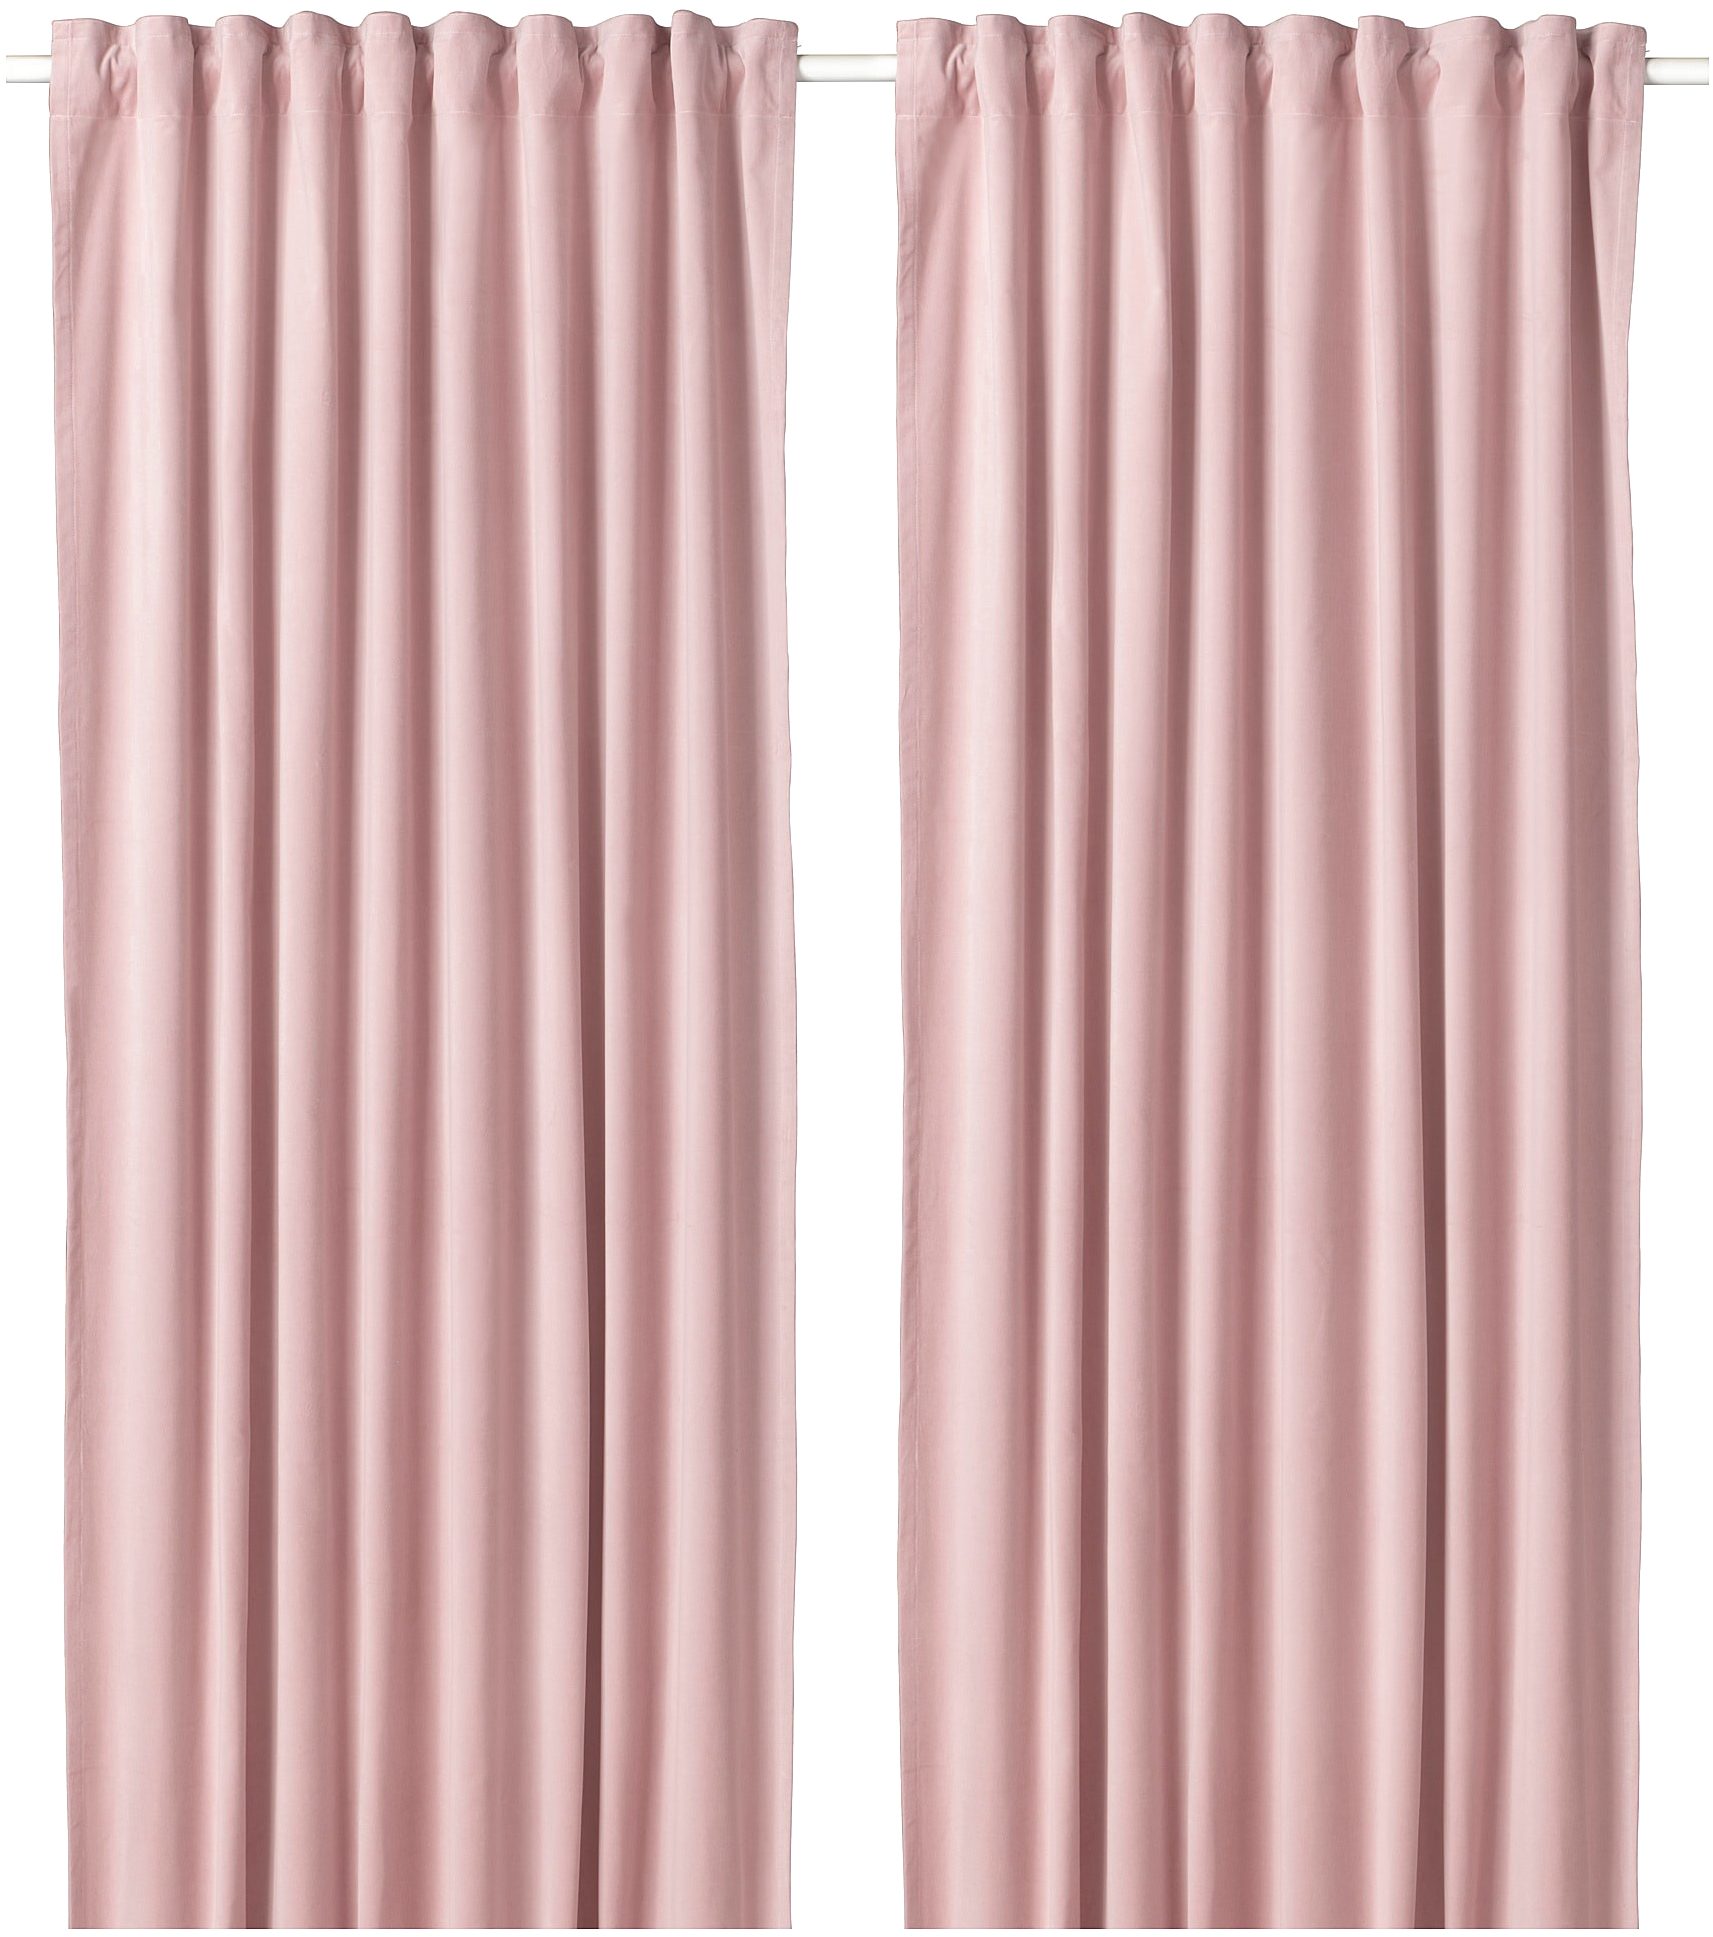 A Pair Of Pink Curtains